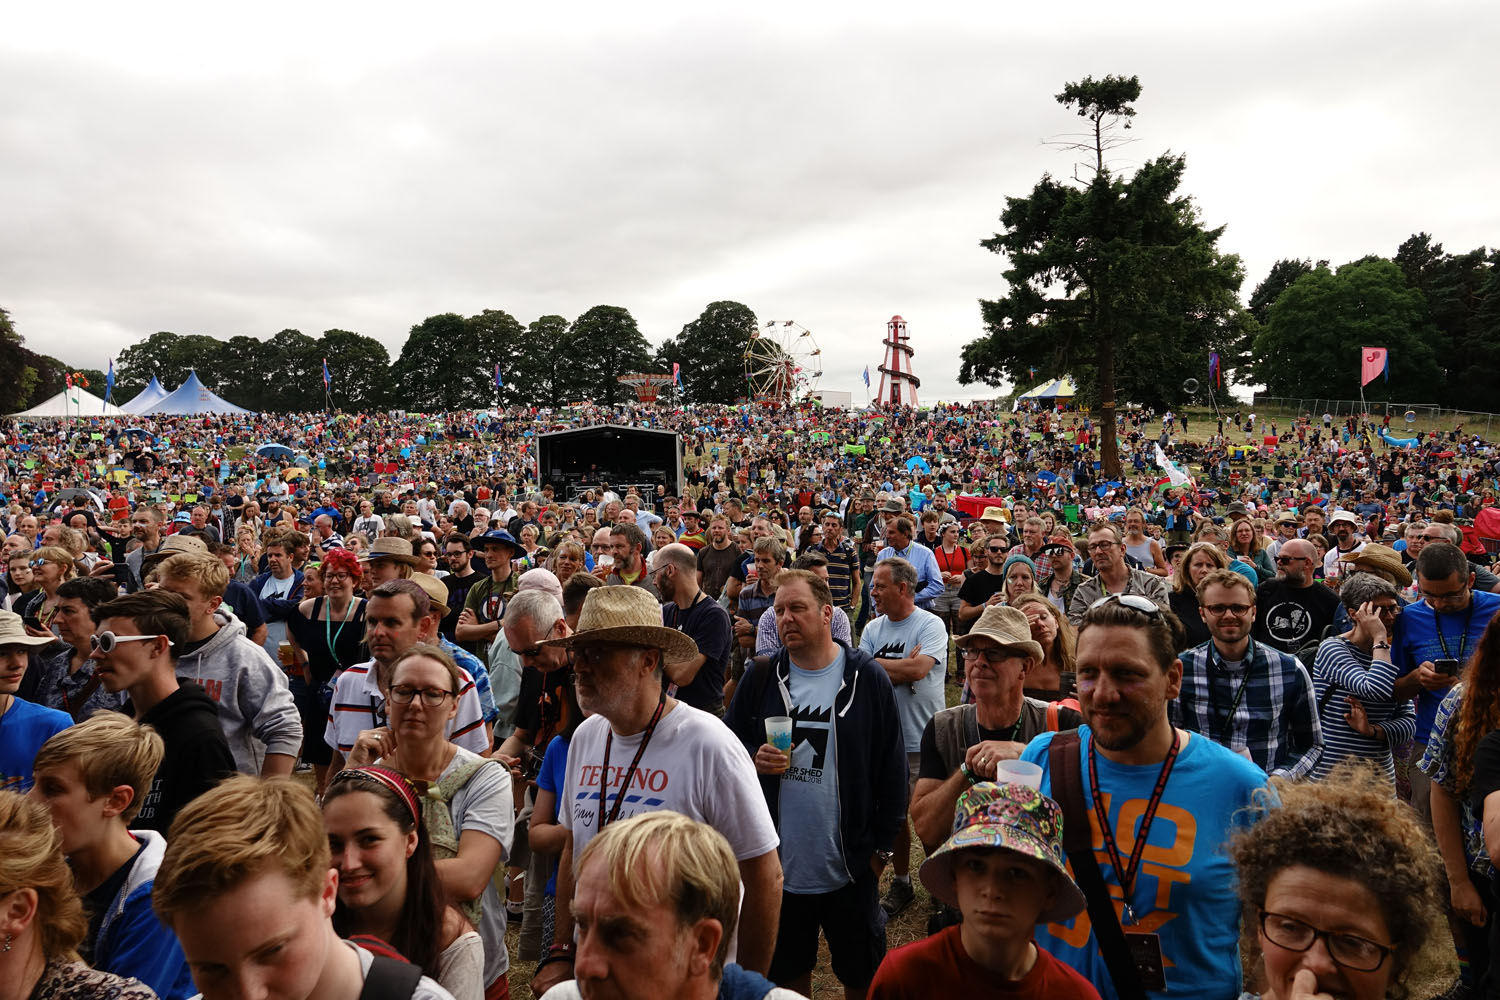 The crowd for Public Service Broadcasting on the main stage at Deer Shed 2018